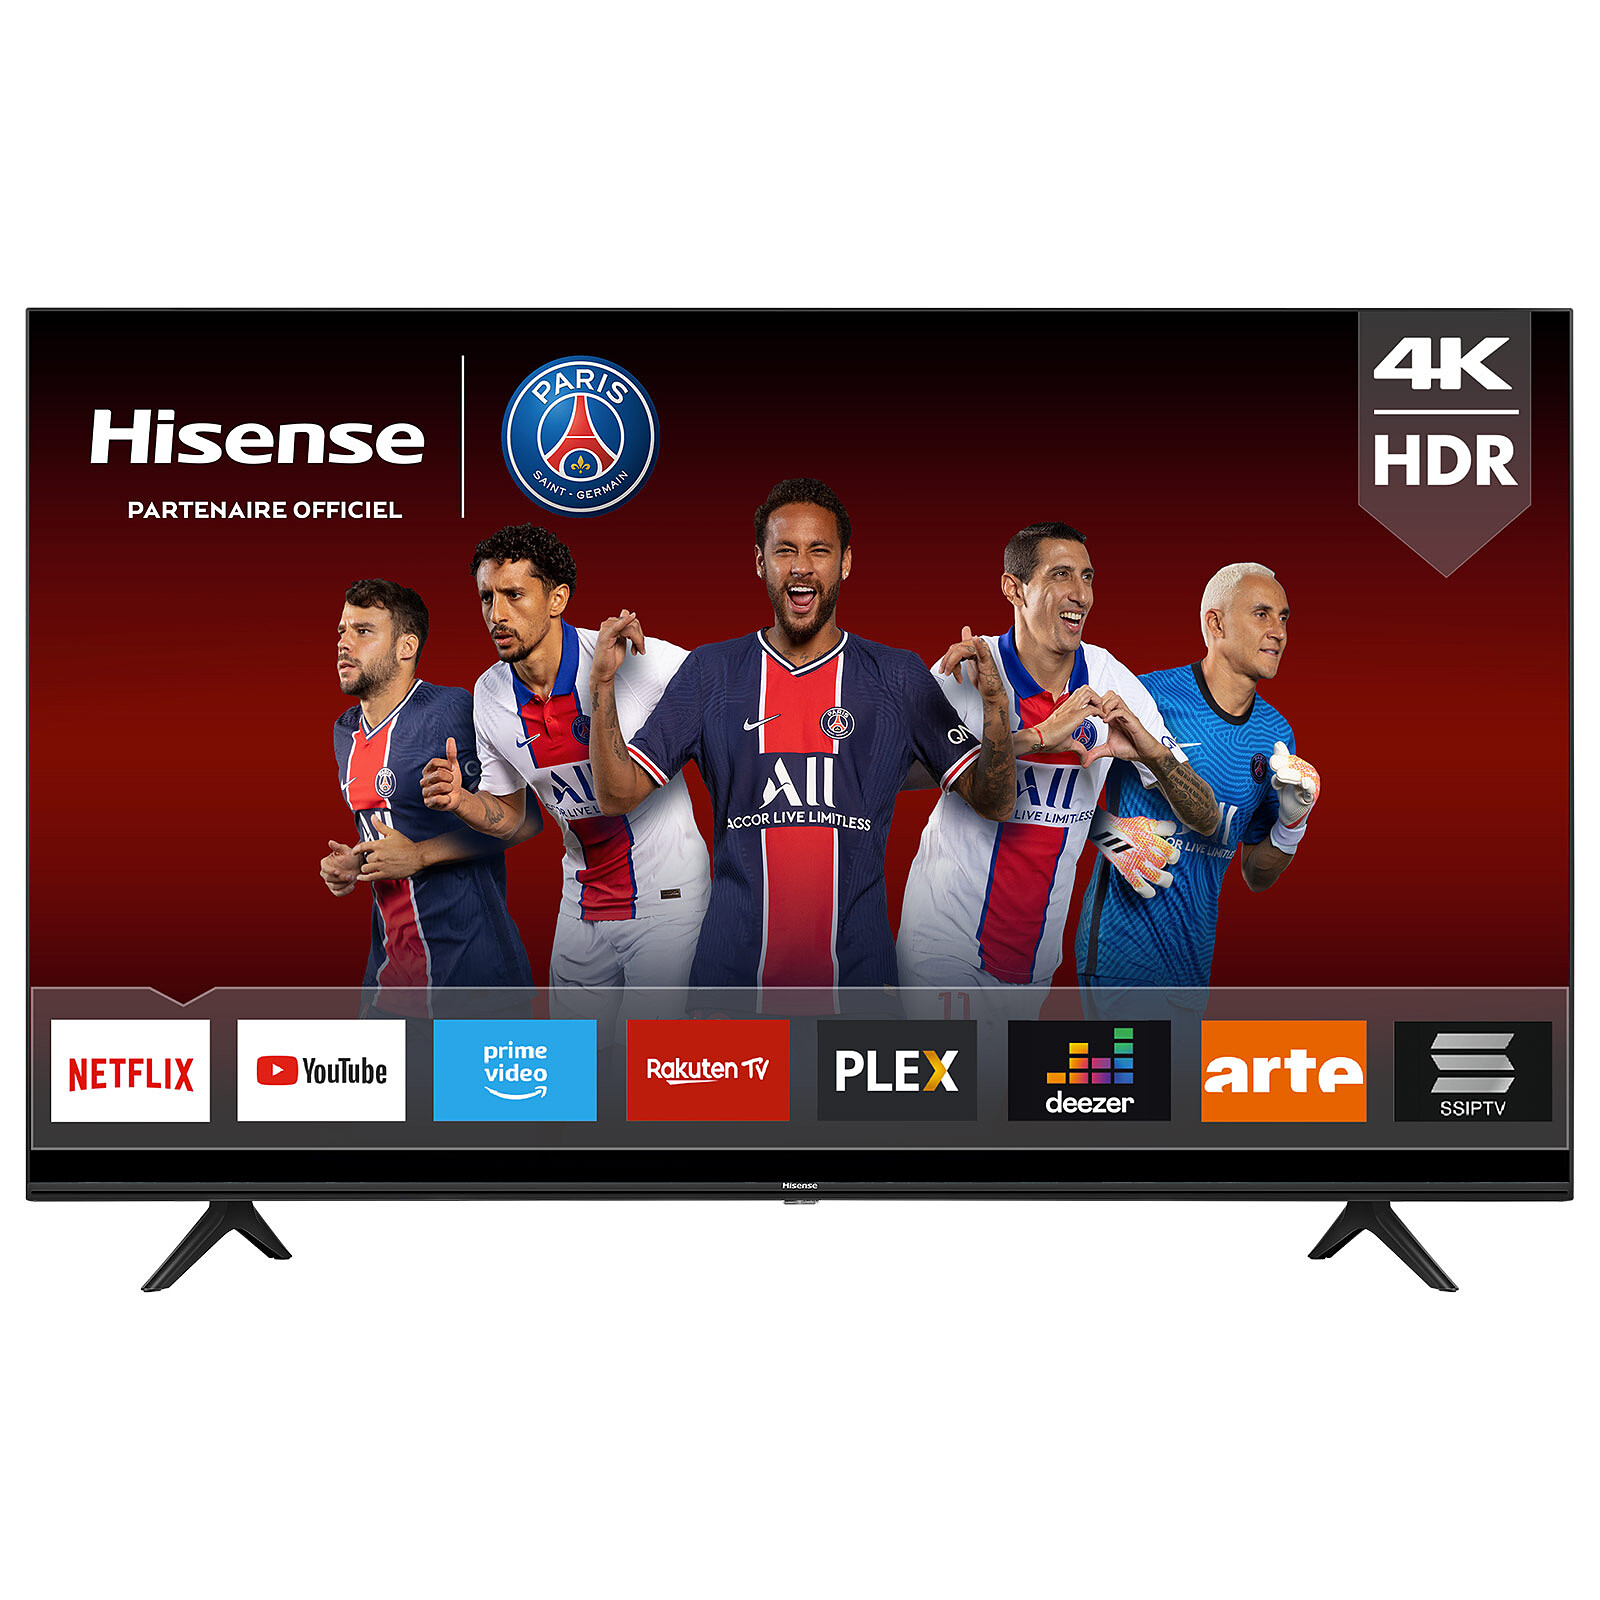 HISENSE 43A7100FTUK 43-inch 4K UHD HDR Smart TV with Freeview play